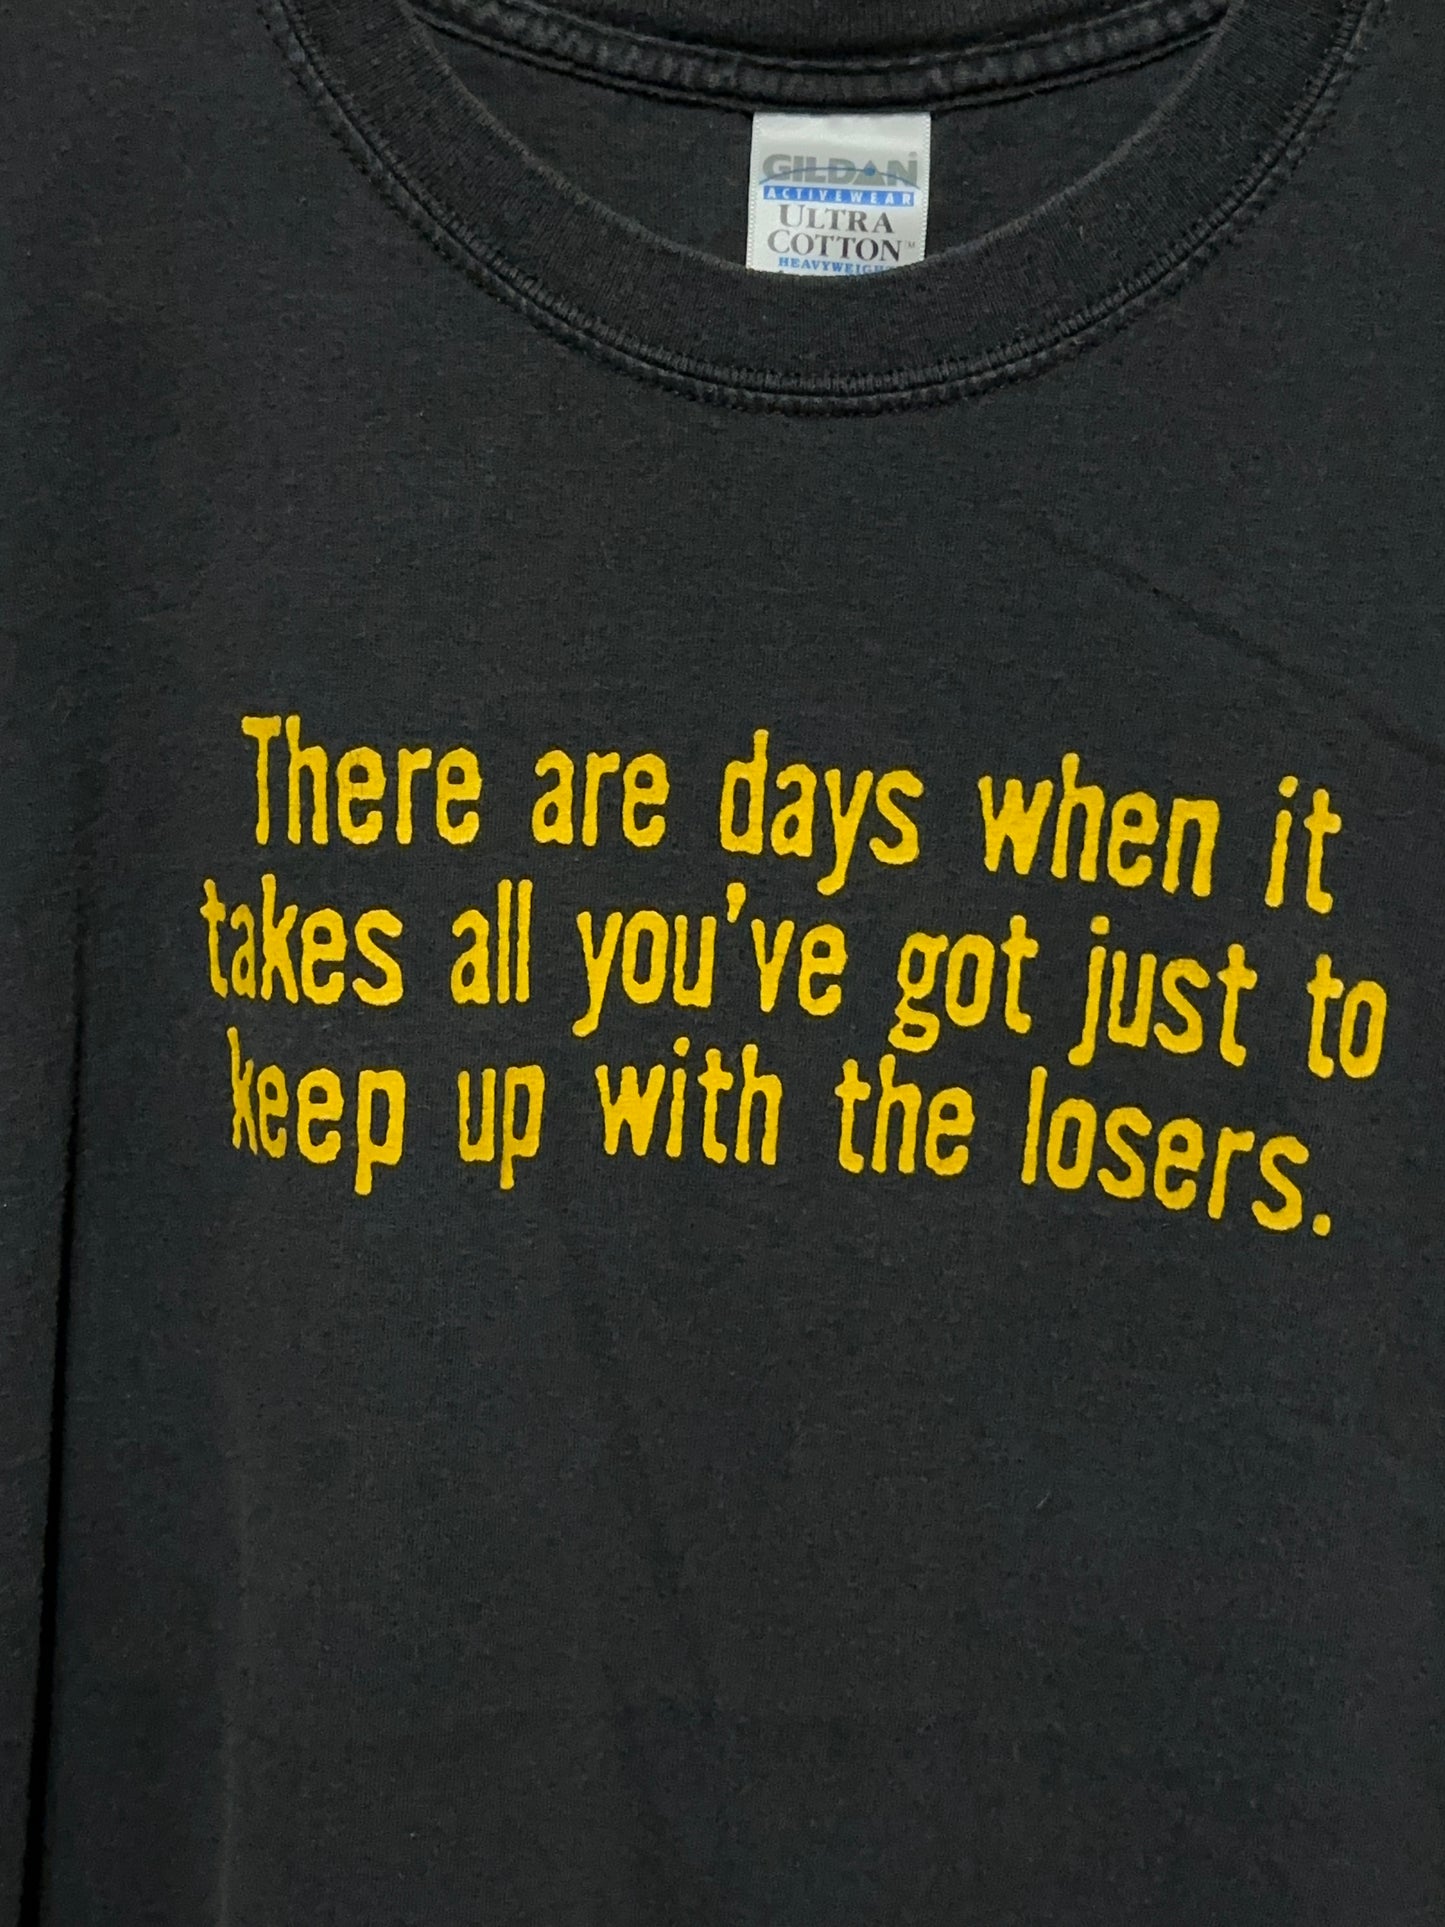 Y2K Keep Up With The Losers Funny Adult Humor Tee XL